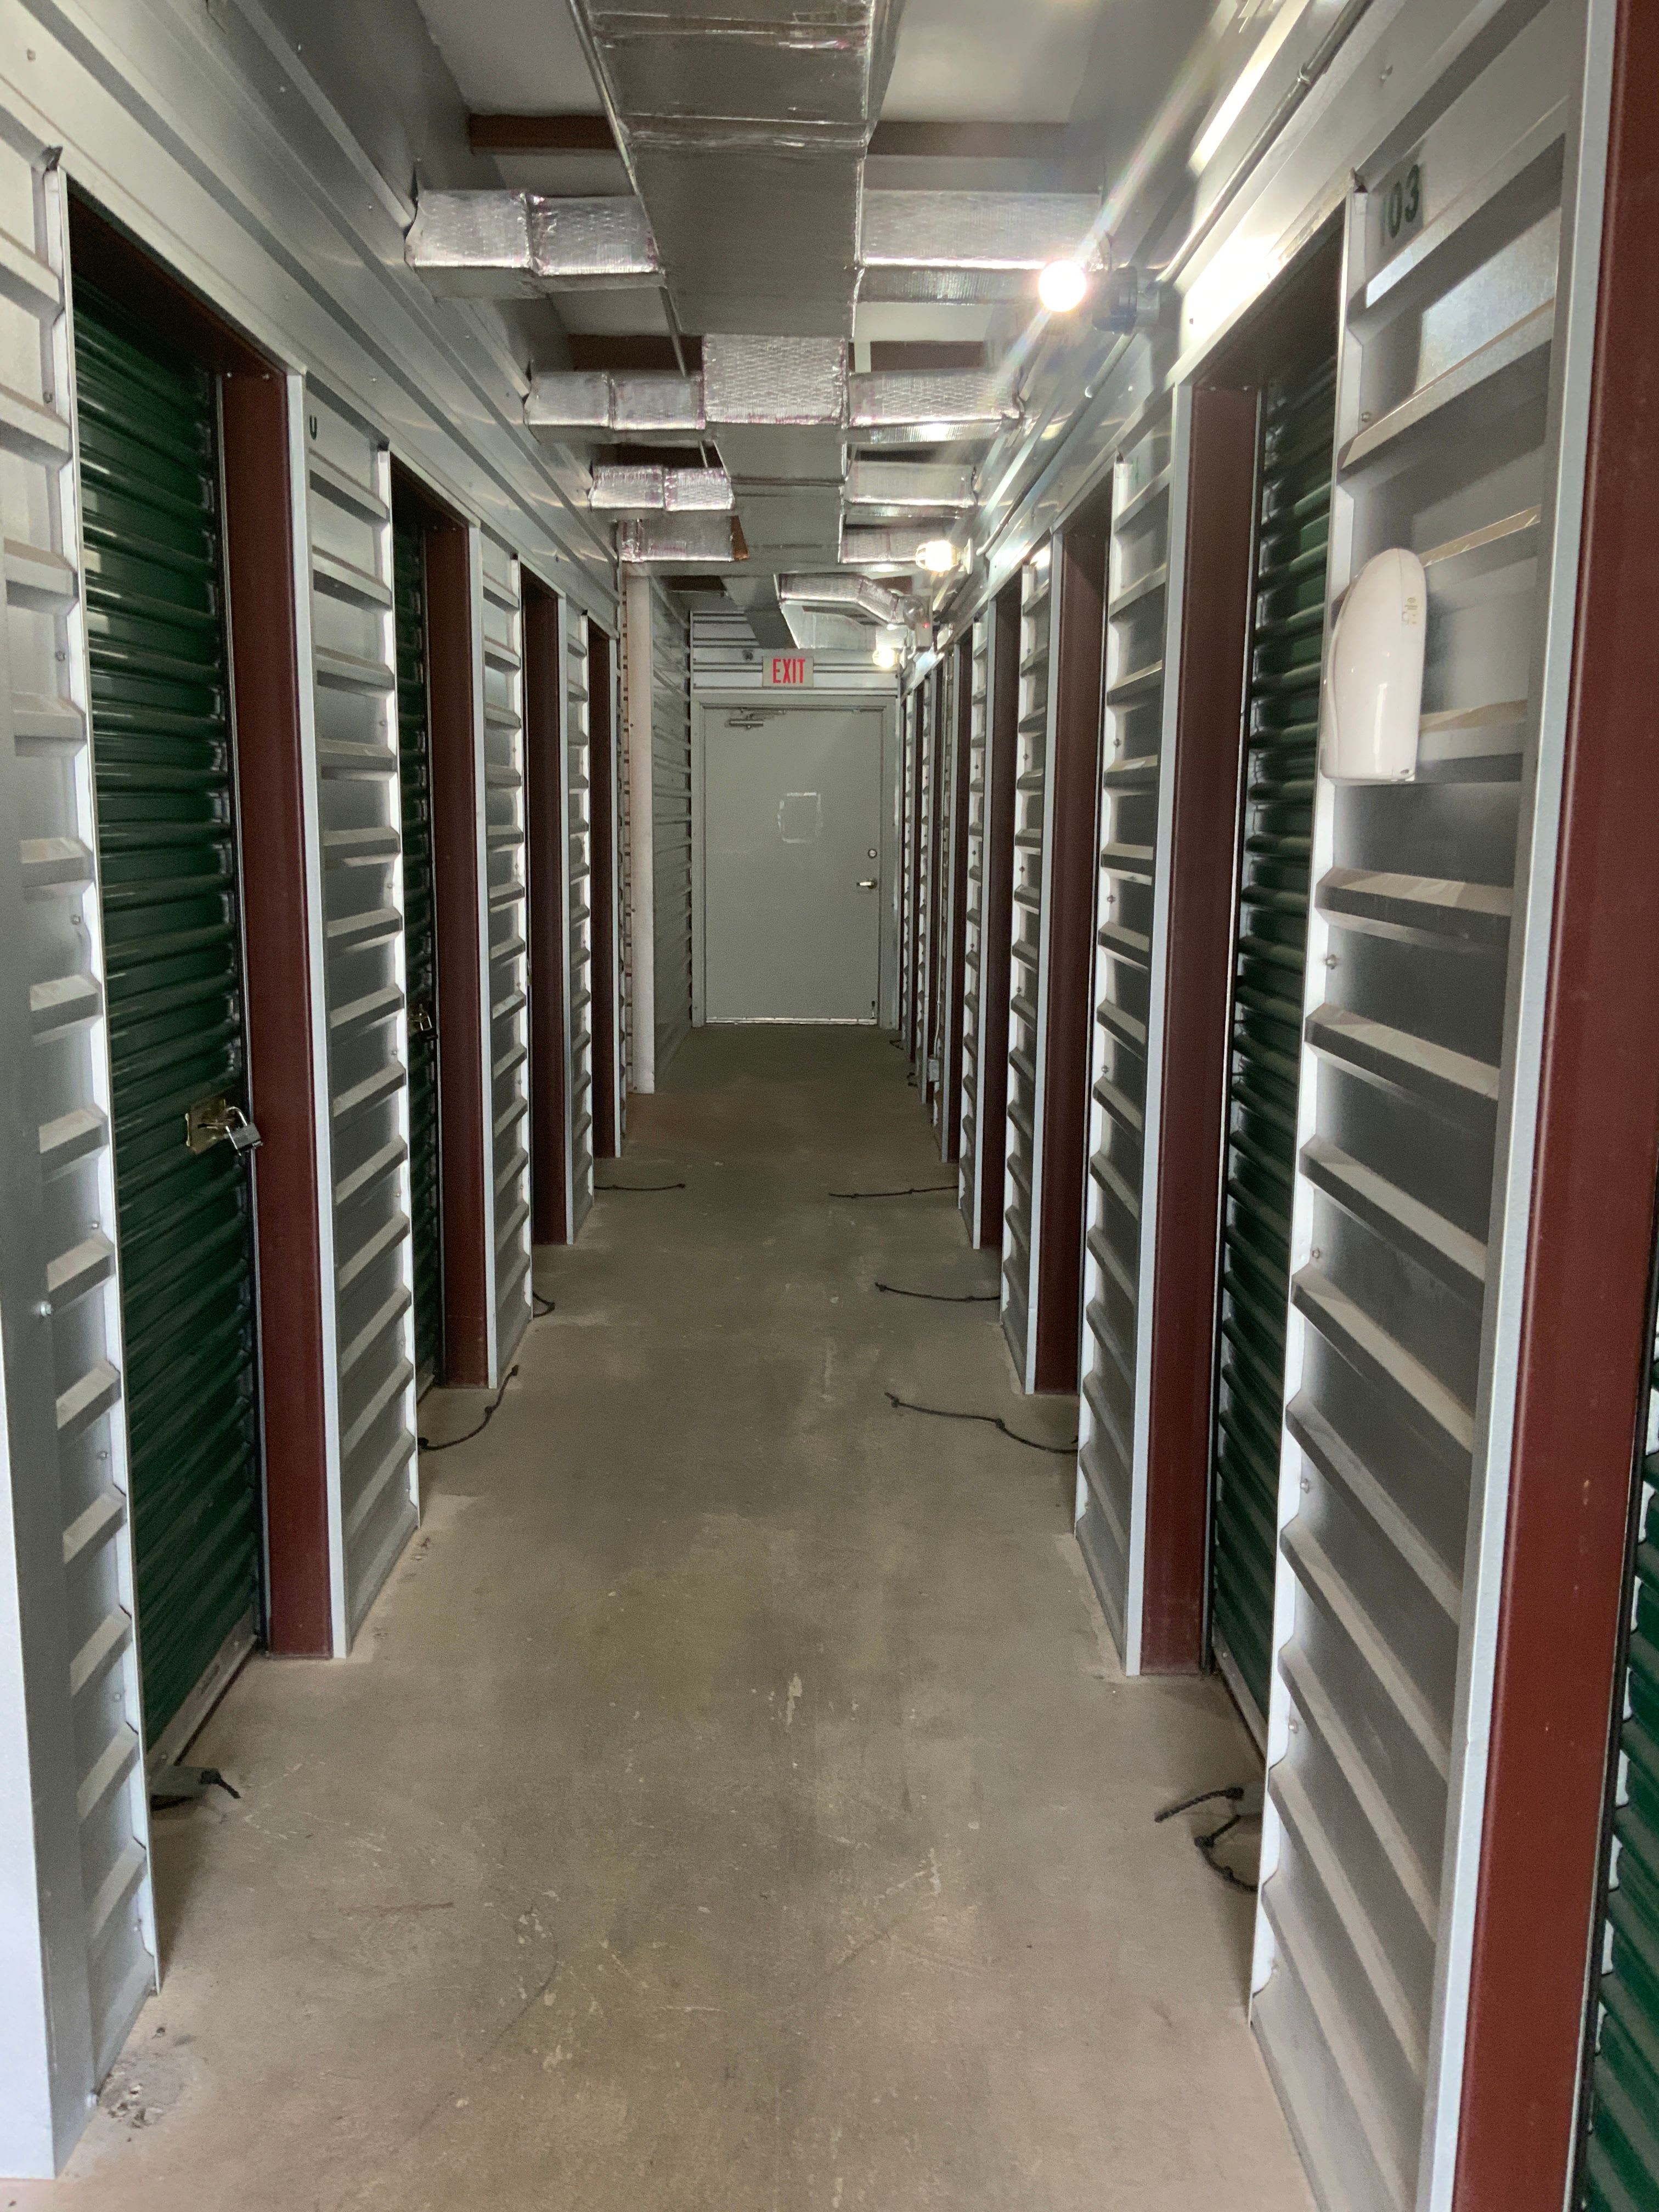 Learn more about auto storage at KO Storage of Harlingen in Harlingen, Texas